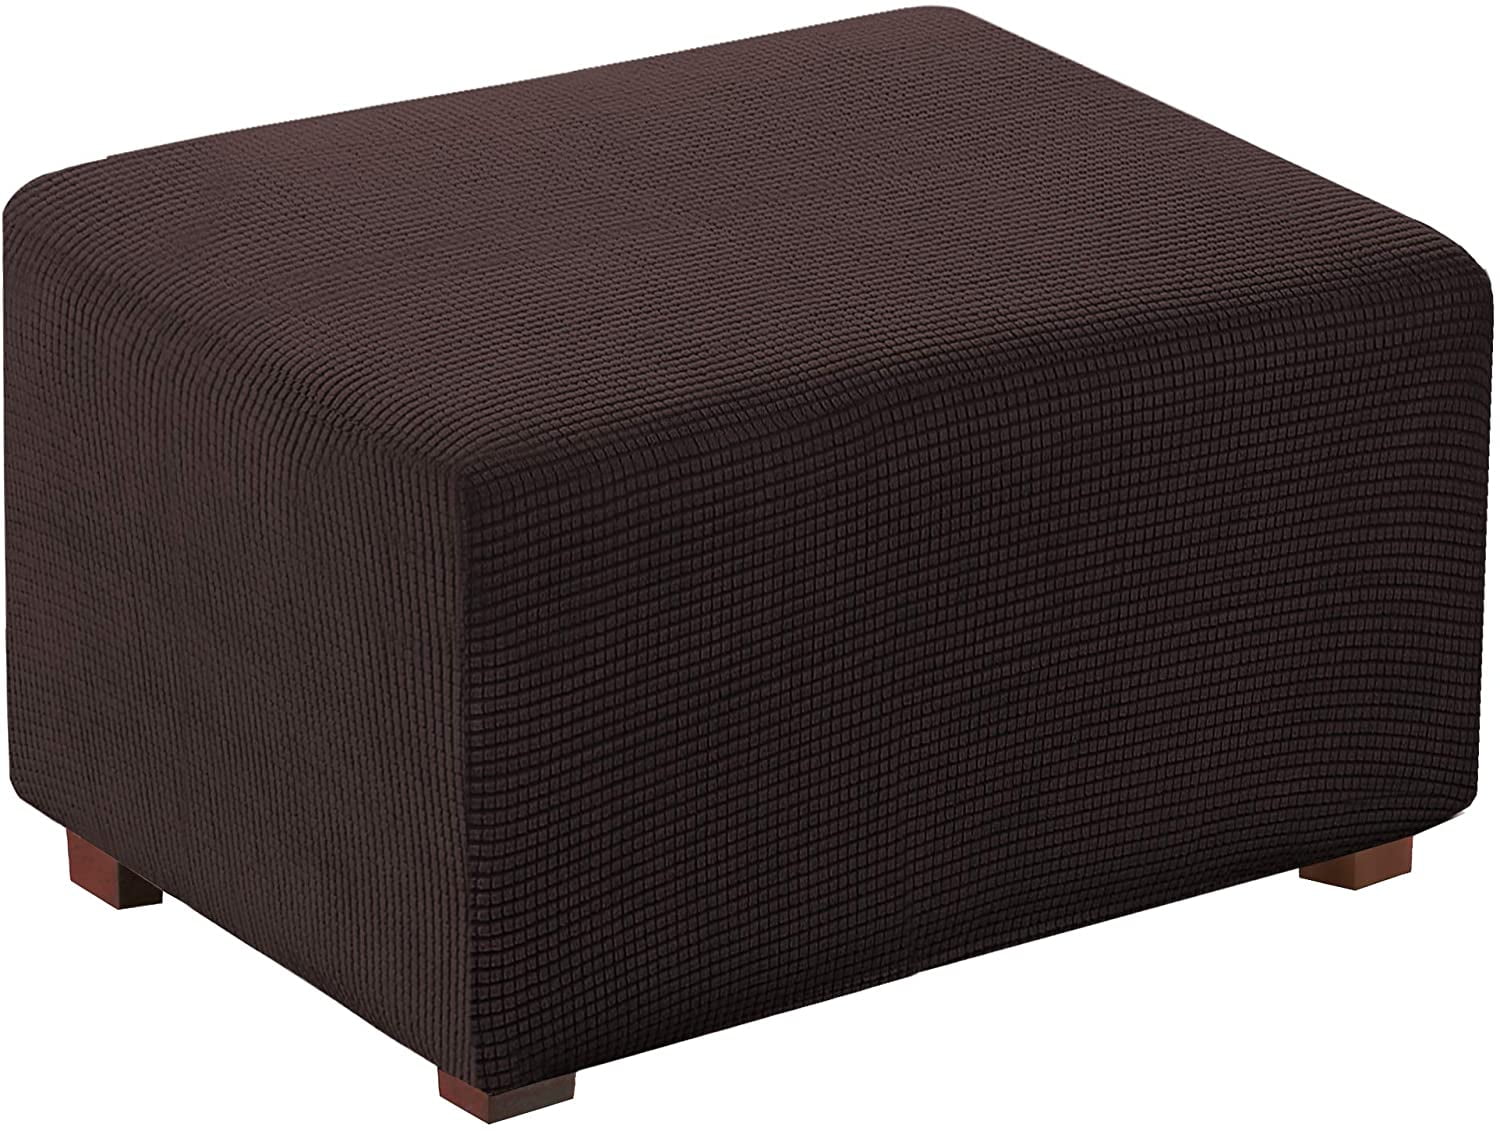 Details about   US Stretchy Ottoman Slipcover Sleeproom Footstool Covers Stool Protective Decor 